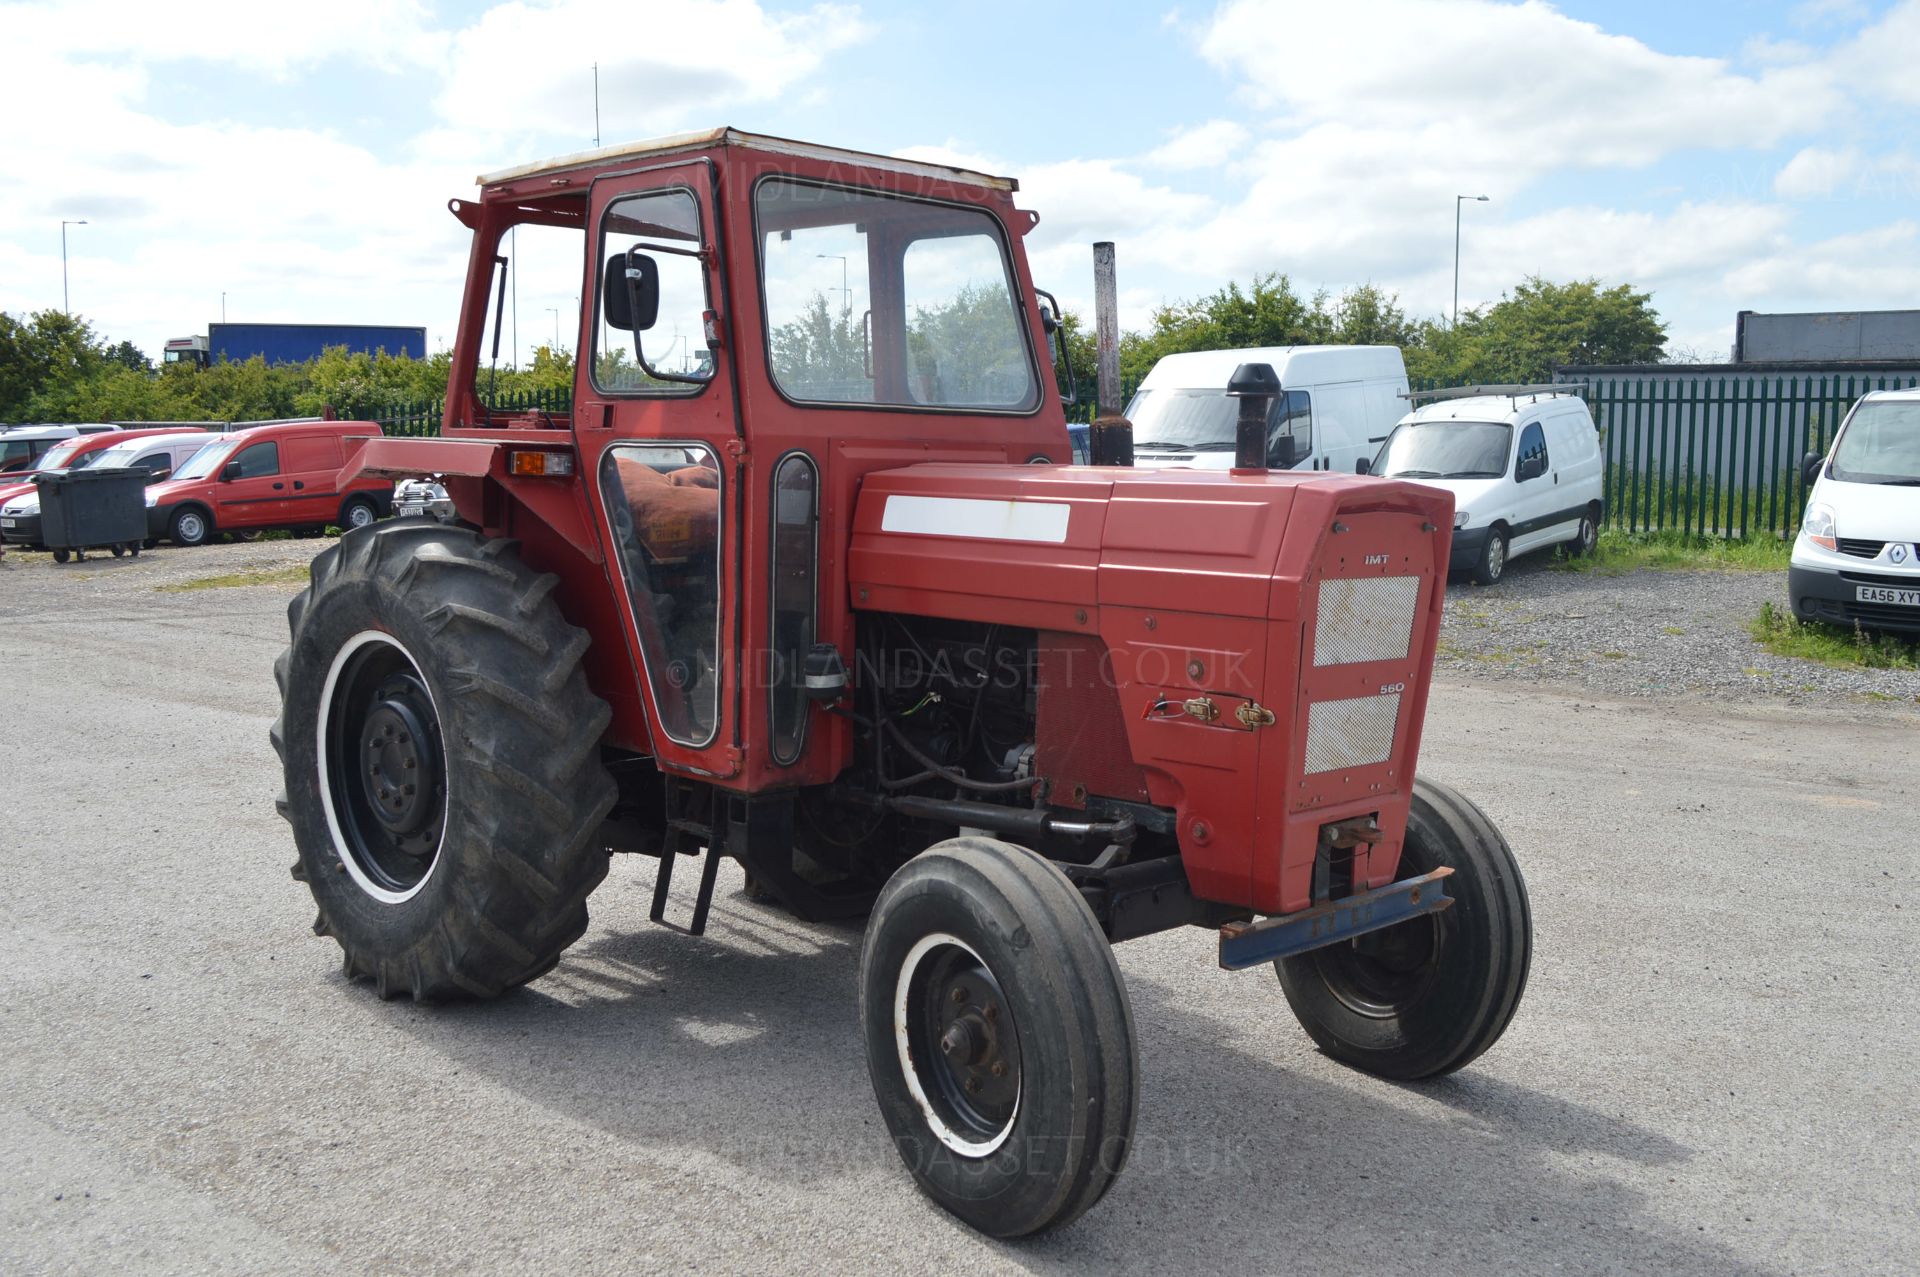 1986 IMT TRACTOR SHOWING 1 FORMER OWNER